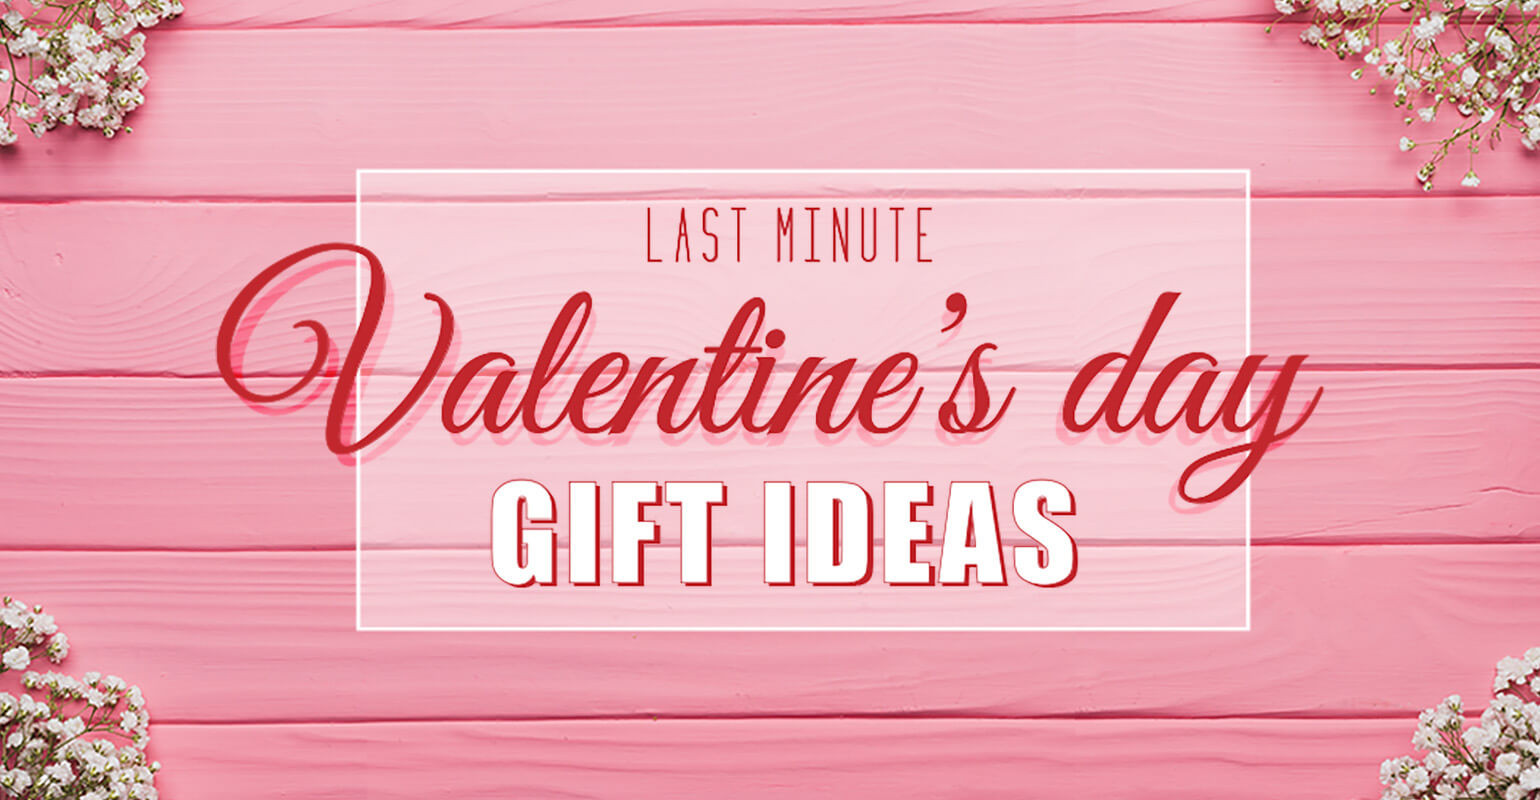 Valentines Day Gift Ideas 2020
 Last Minute Valentine s Day Gift Ideas 2020 Guide